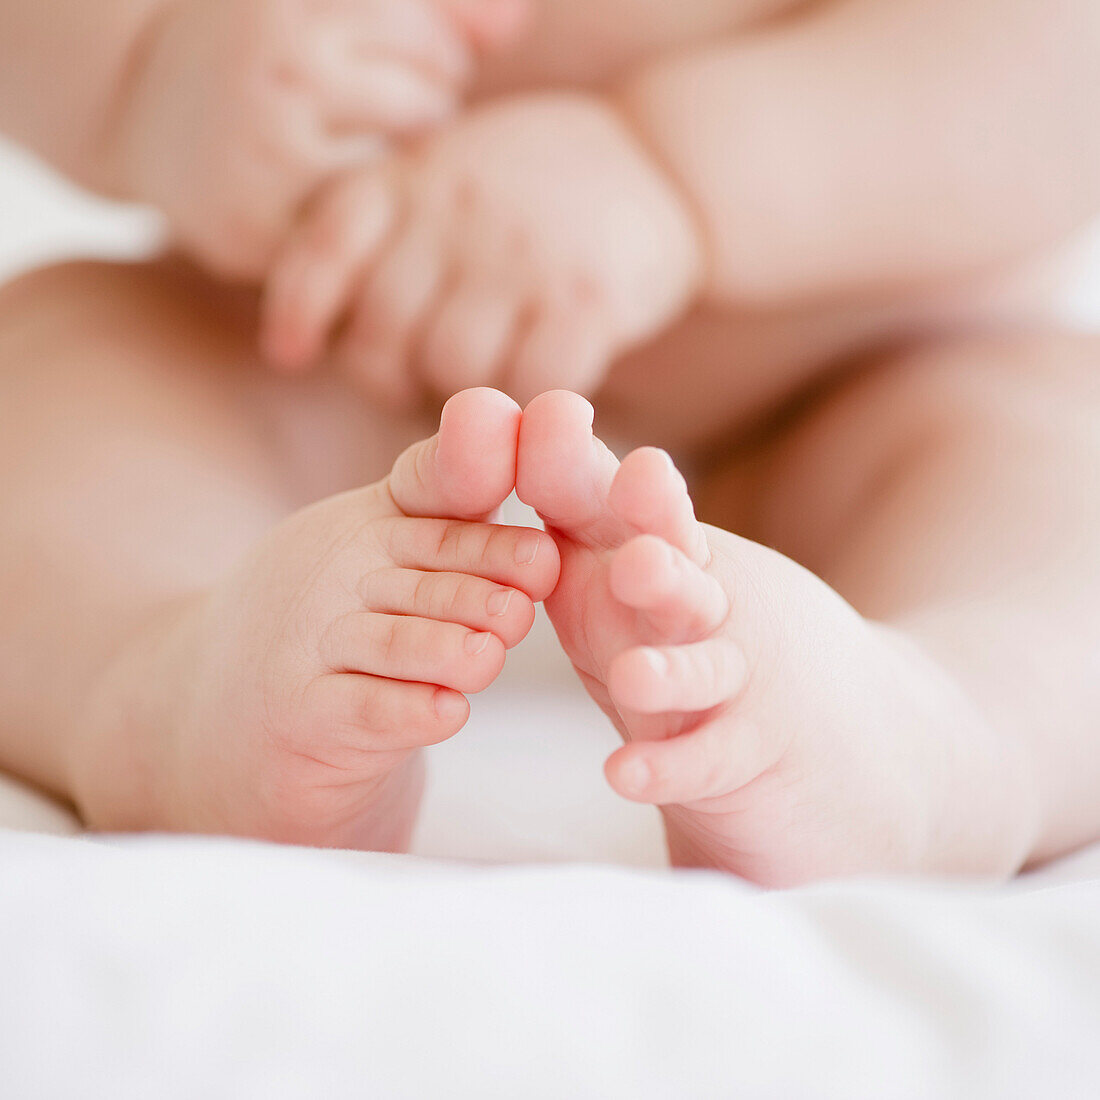 Mixed race baby boy's toes, Jersey City, New Jersey, United States